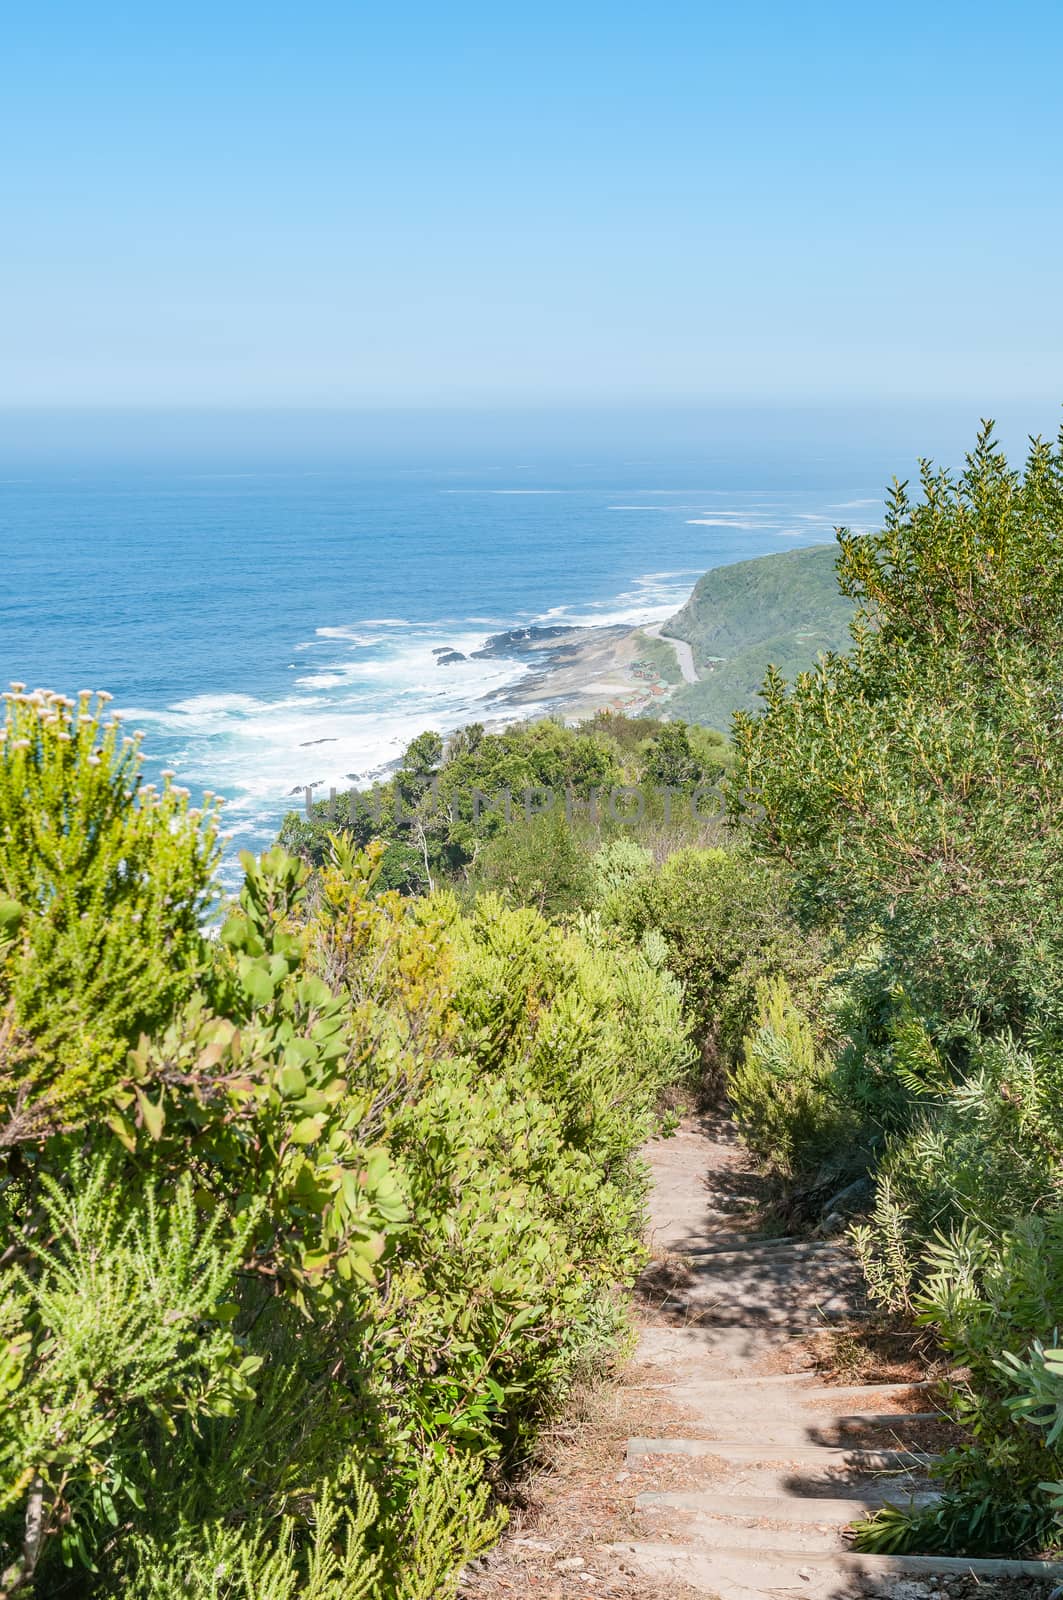 The trail from viewpoint on the hill opposite the river mouth back to Storms River Mouth. The rest camp is visible below